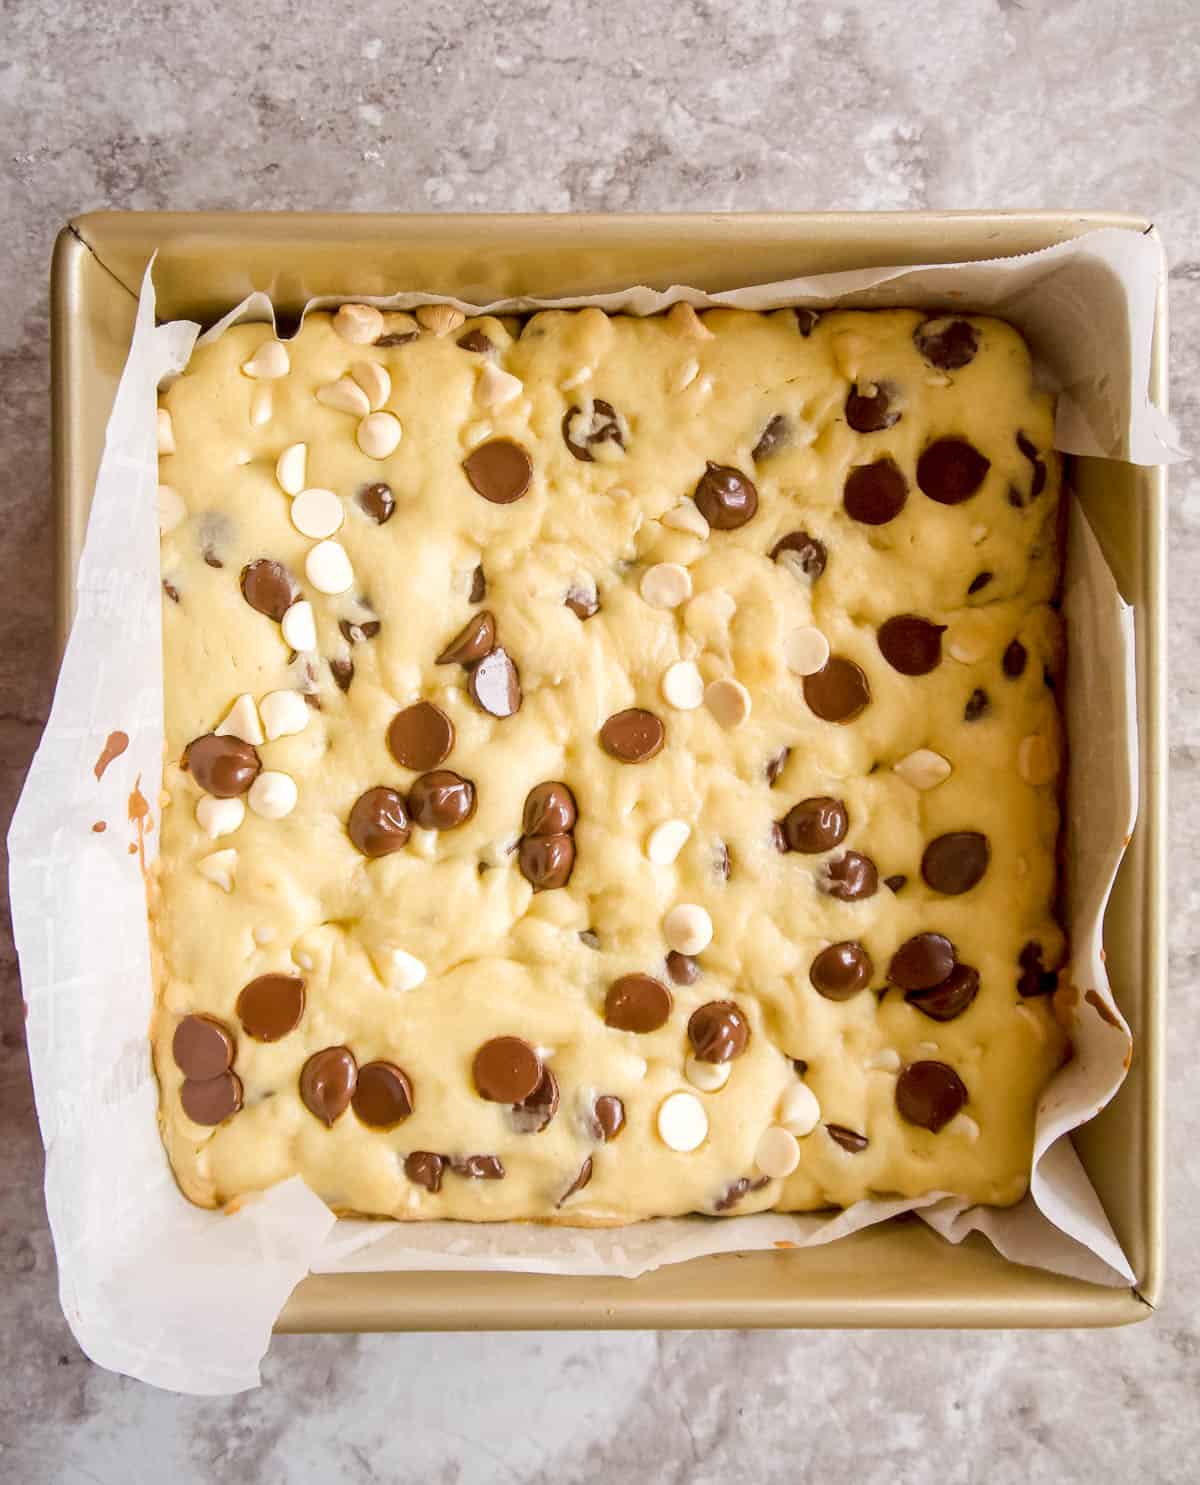 White chocolate brownies in a pan after baking.